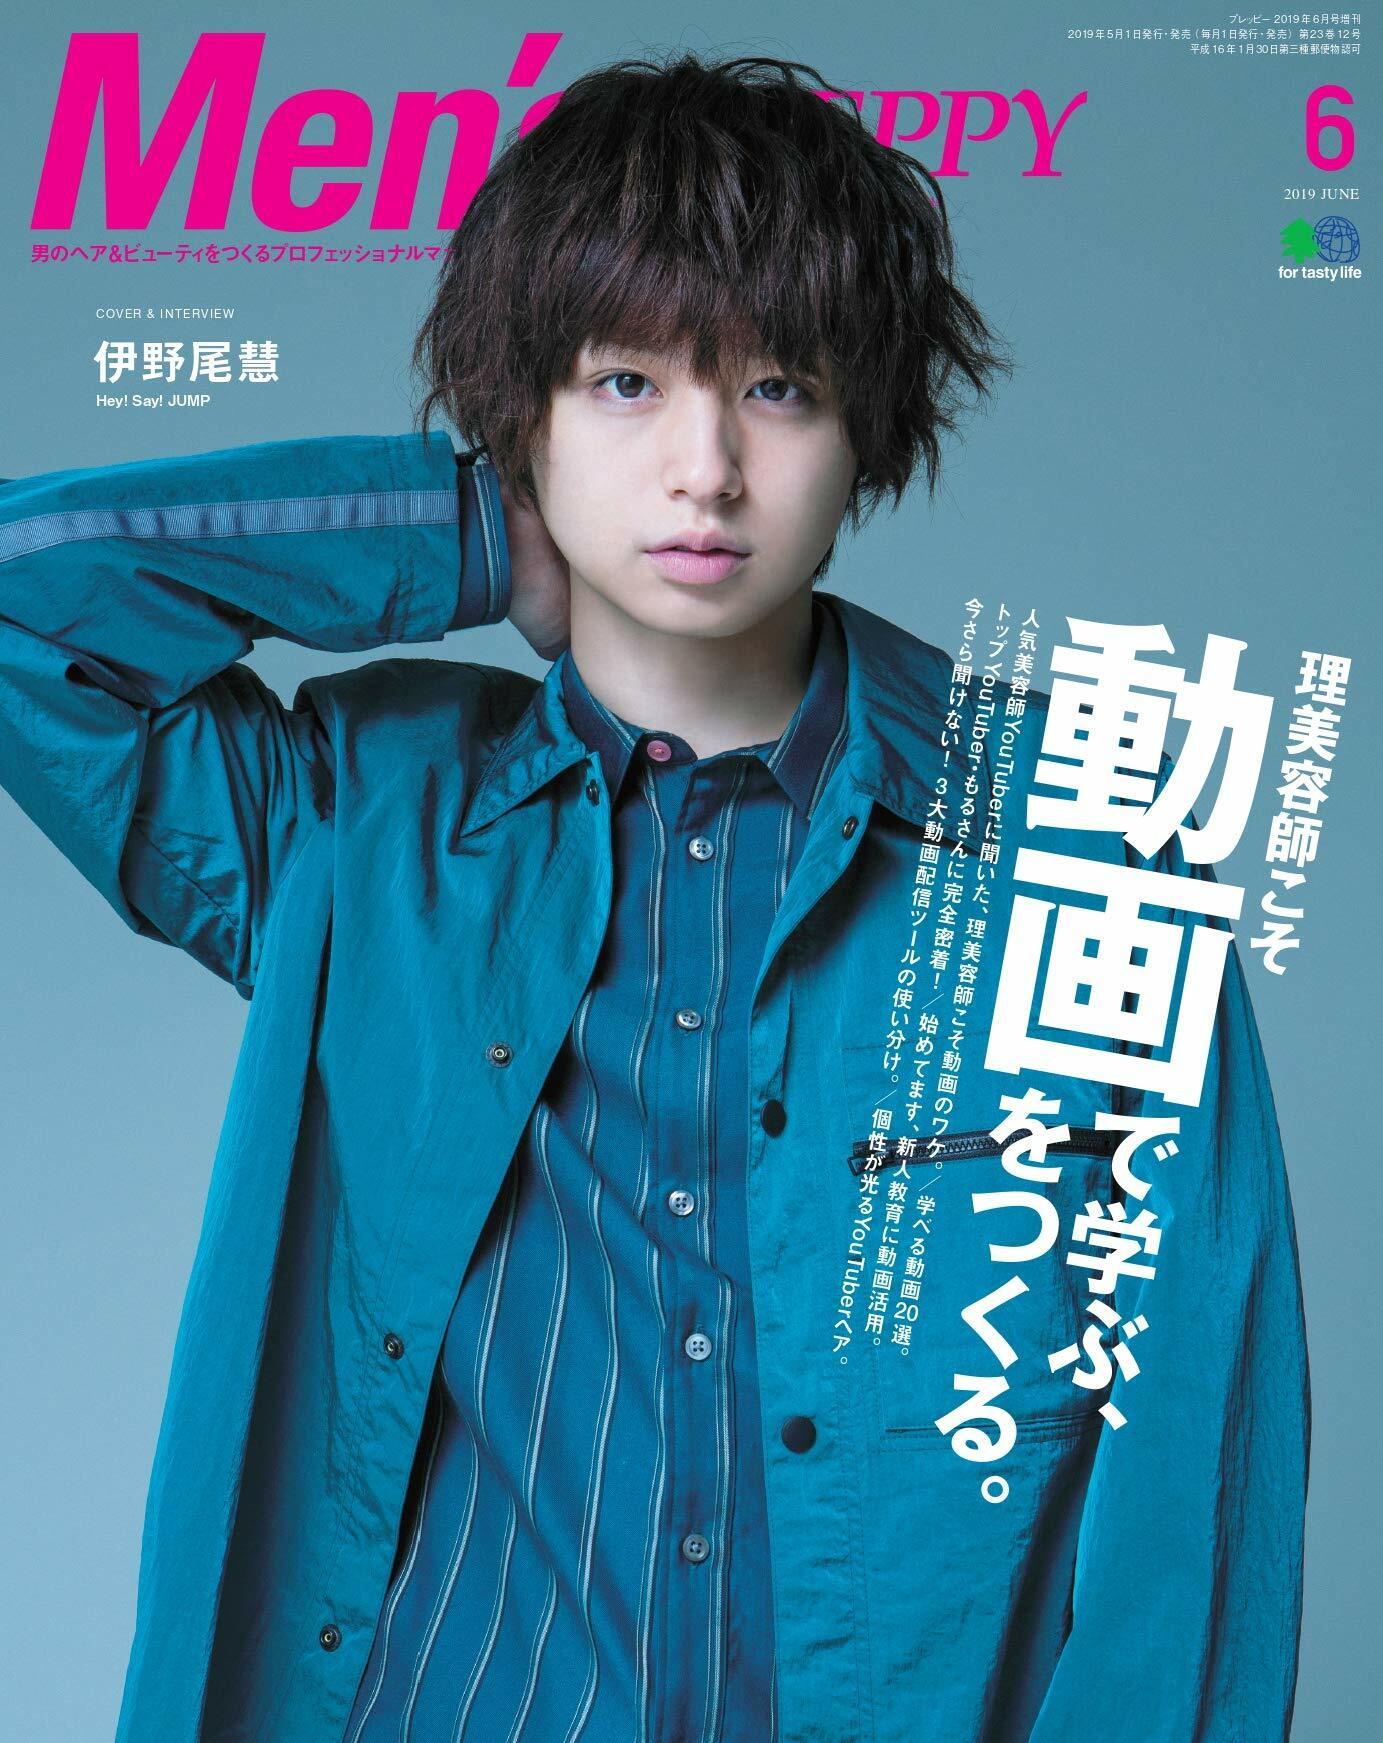 Mens PREPPY (メンズ プレッピ-)2019年 06月號  COVER&INTERVIEW:伊野尾 慧 Hey! Say! JUMP